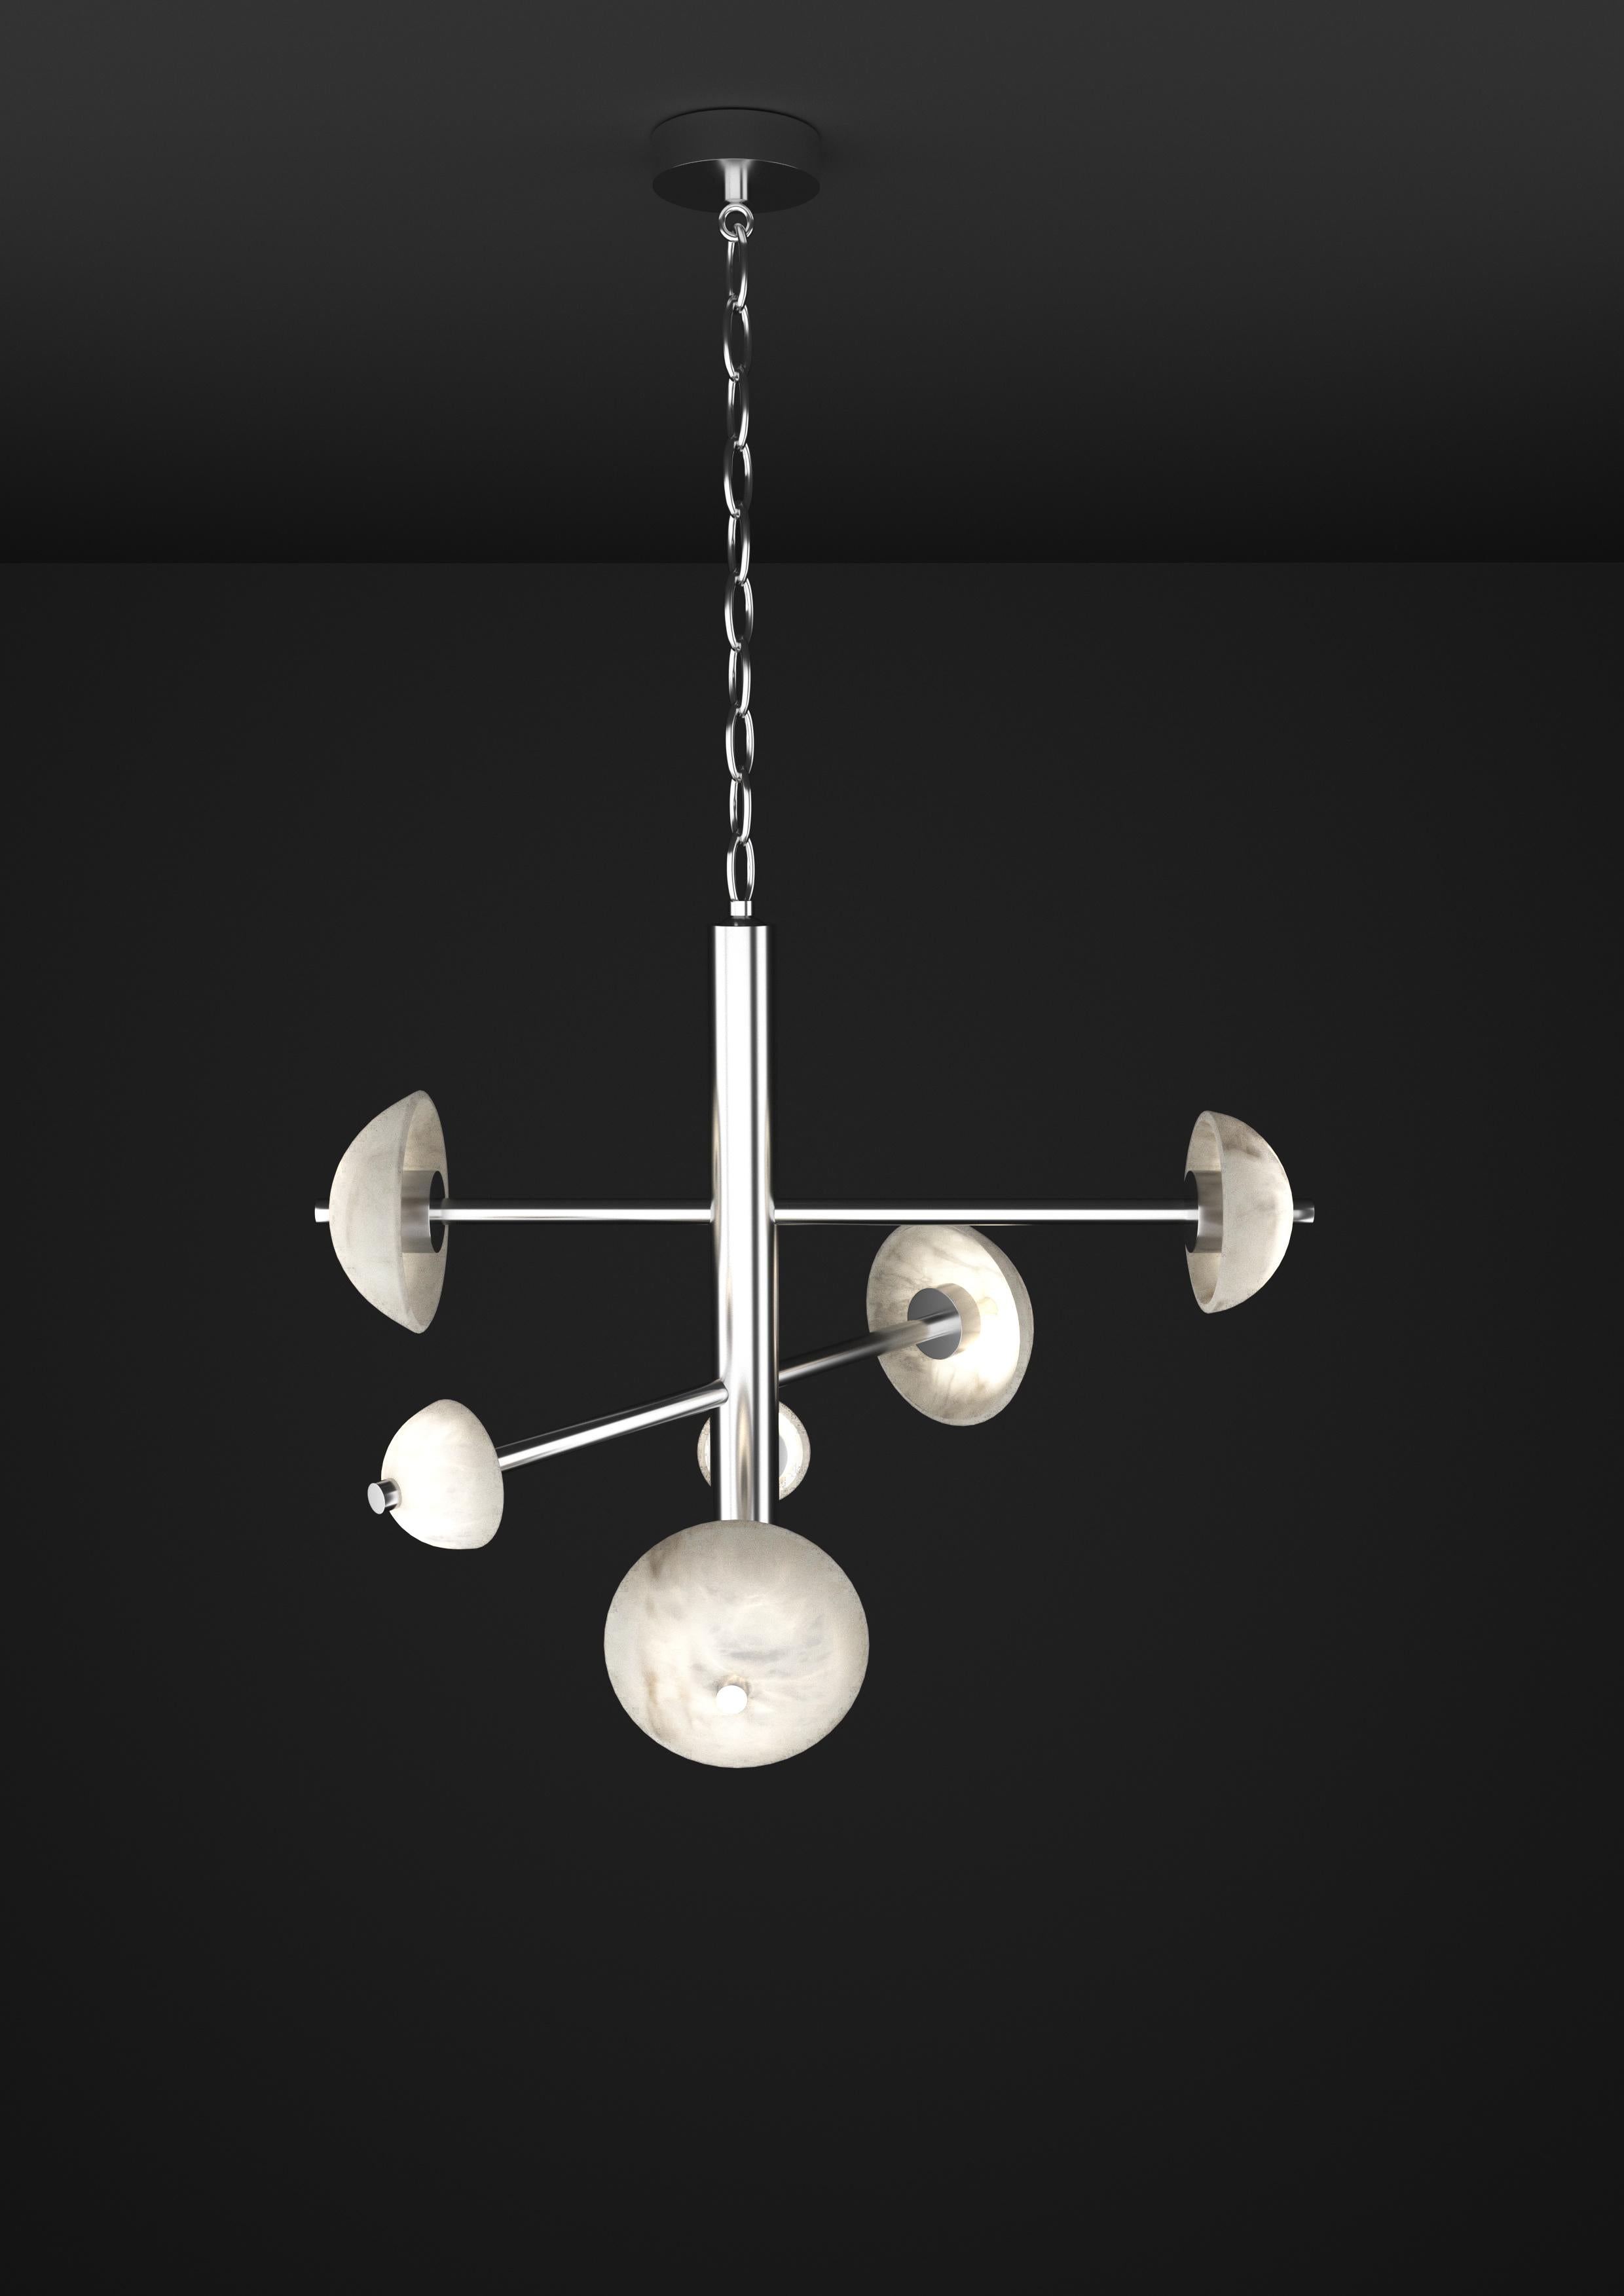 Apollo Shiny Silver Metal Pendant Lamp by Alabastro Italiano
Dimensions: D 70,5 x W 54 x H 64 cm.
Materials: White alabaster and metal.

Available in different finishes: Shiny Silver, Bronze, Brushed Brass, Ruggine of Florence, Brushed Burnished,